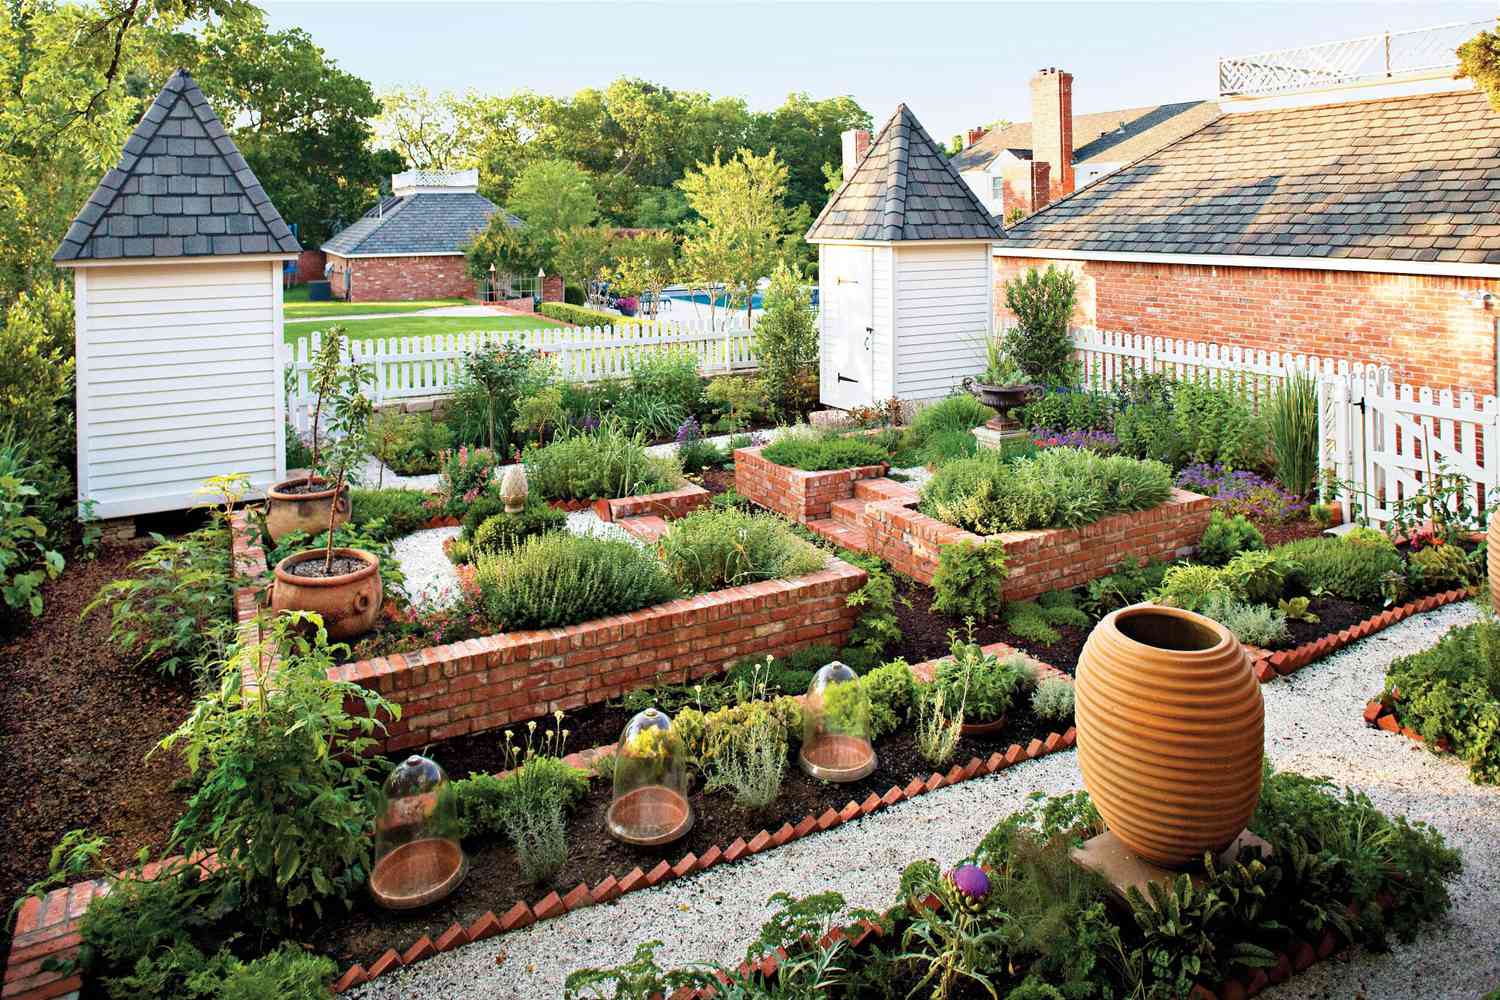 How To Make A Yard Look Nice Without Grass